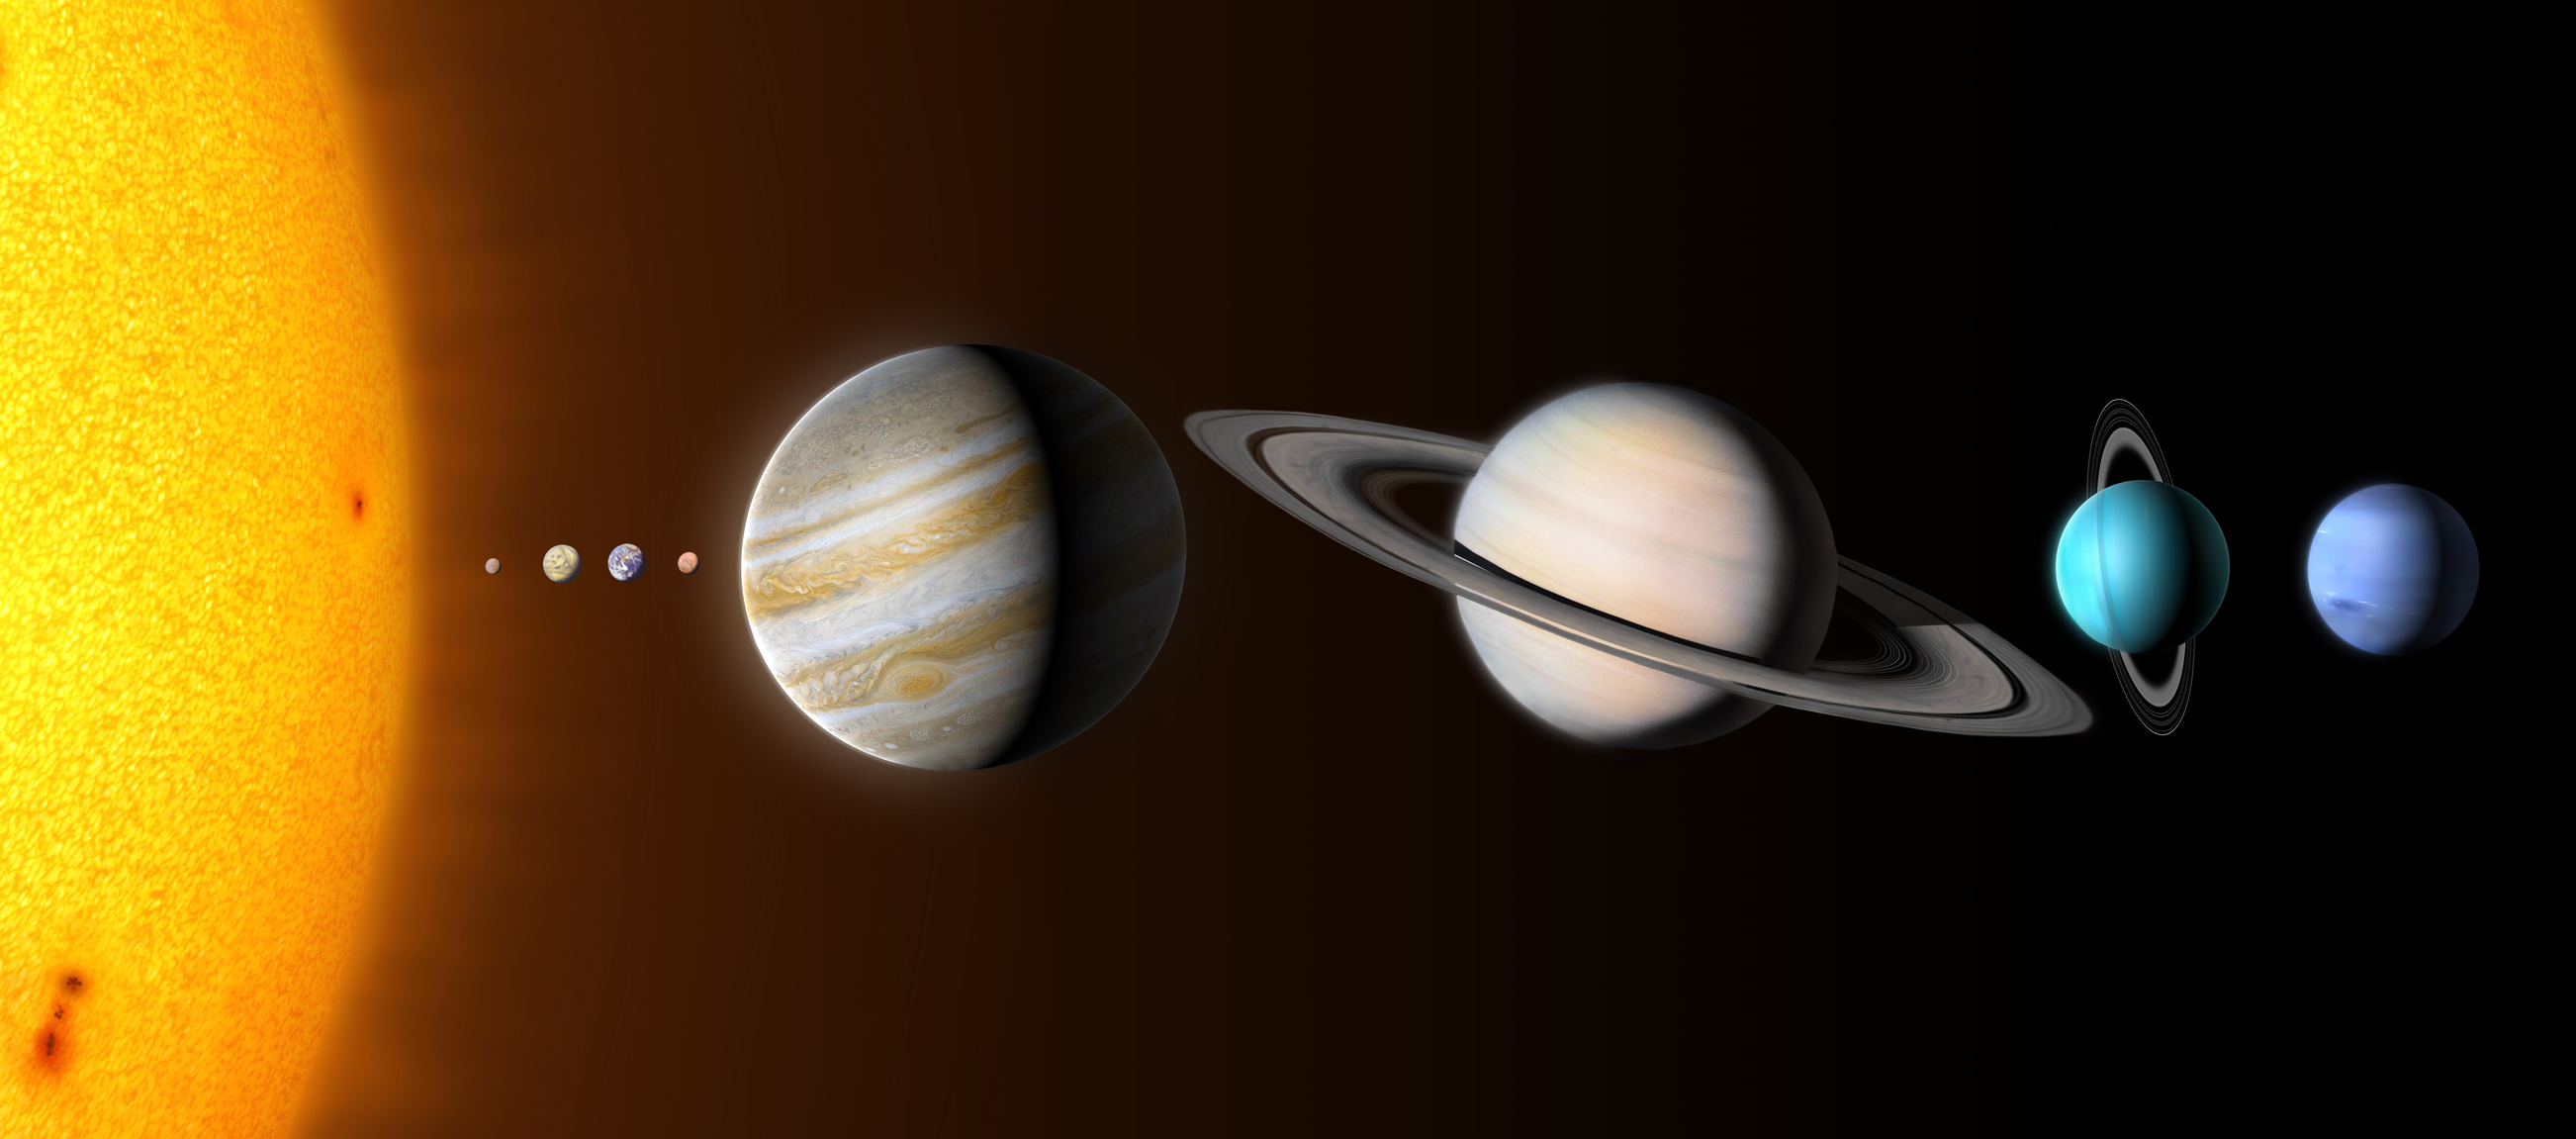 Illustration of the solar system at scale.